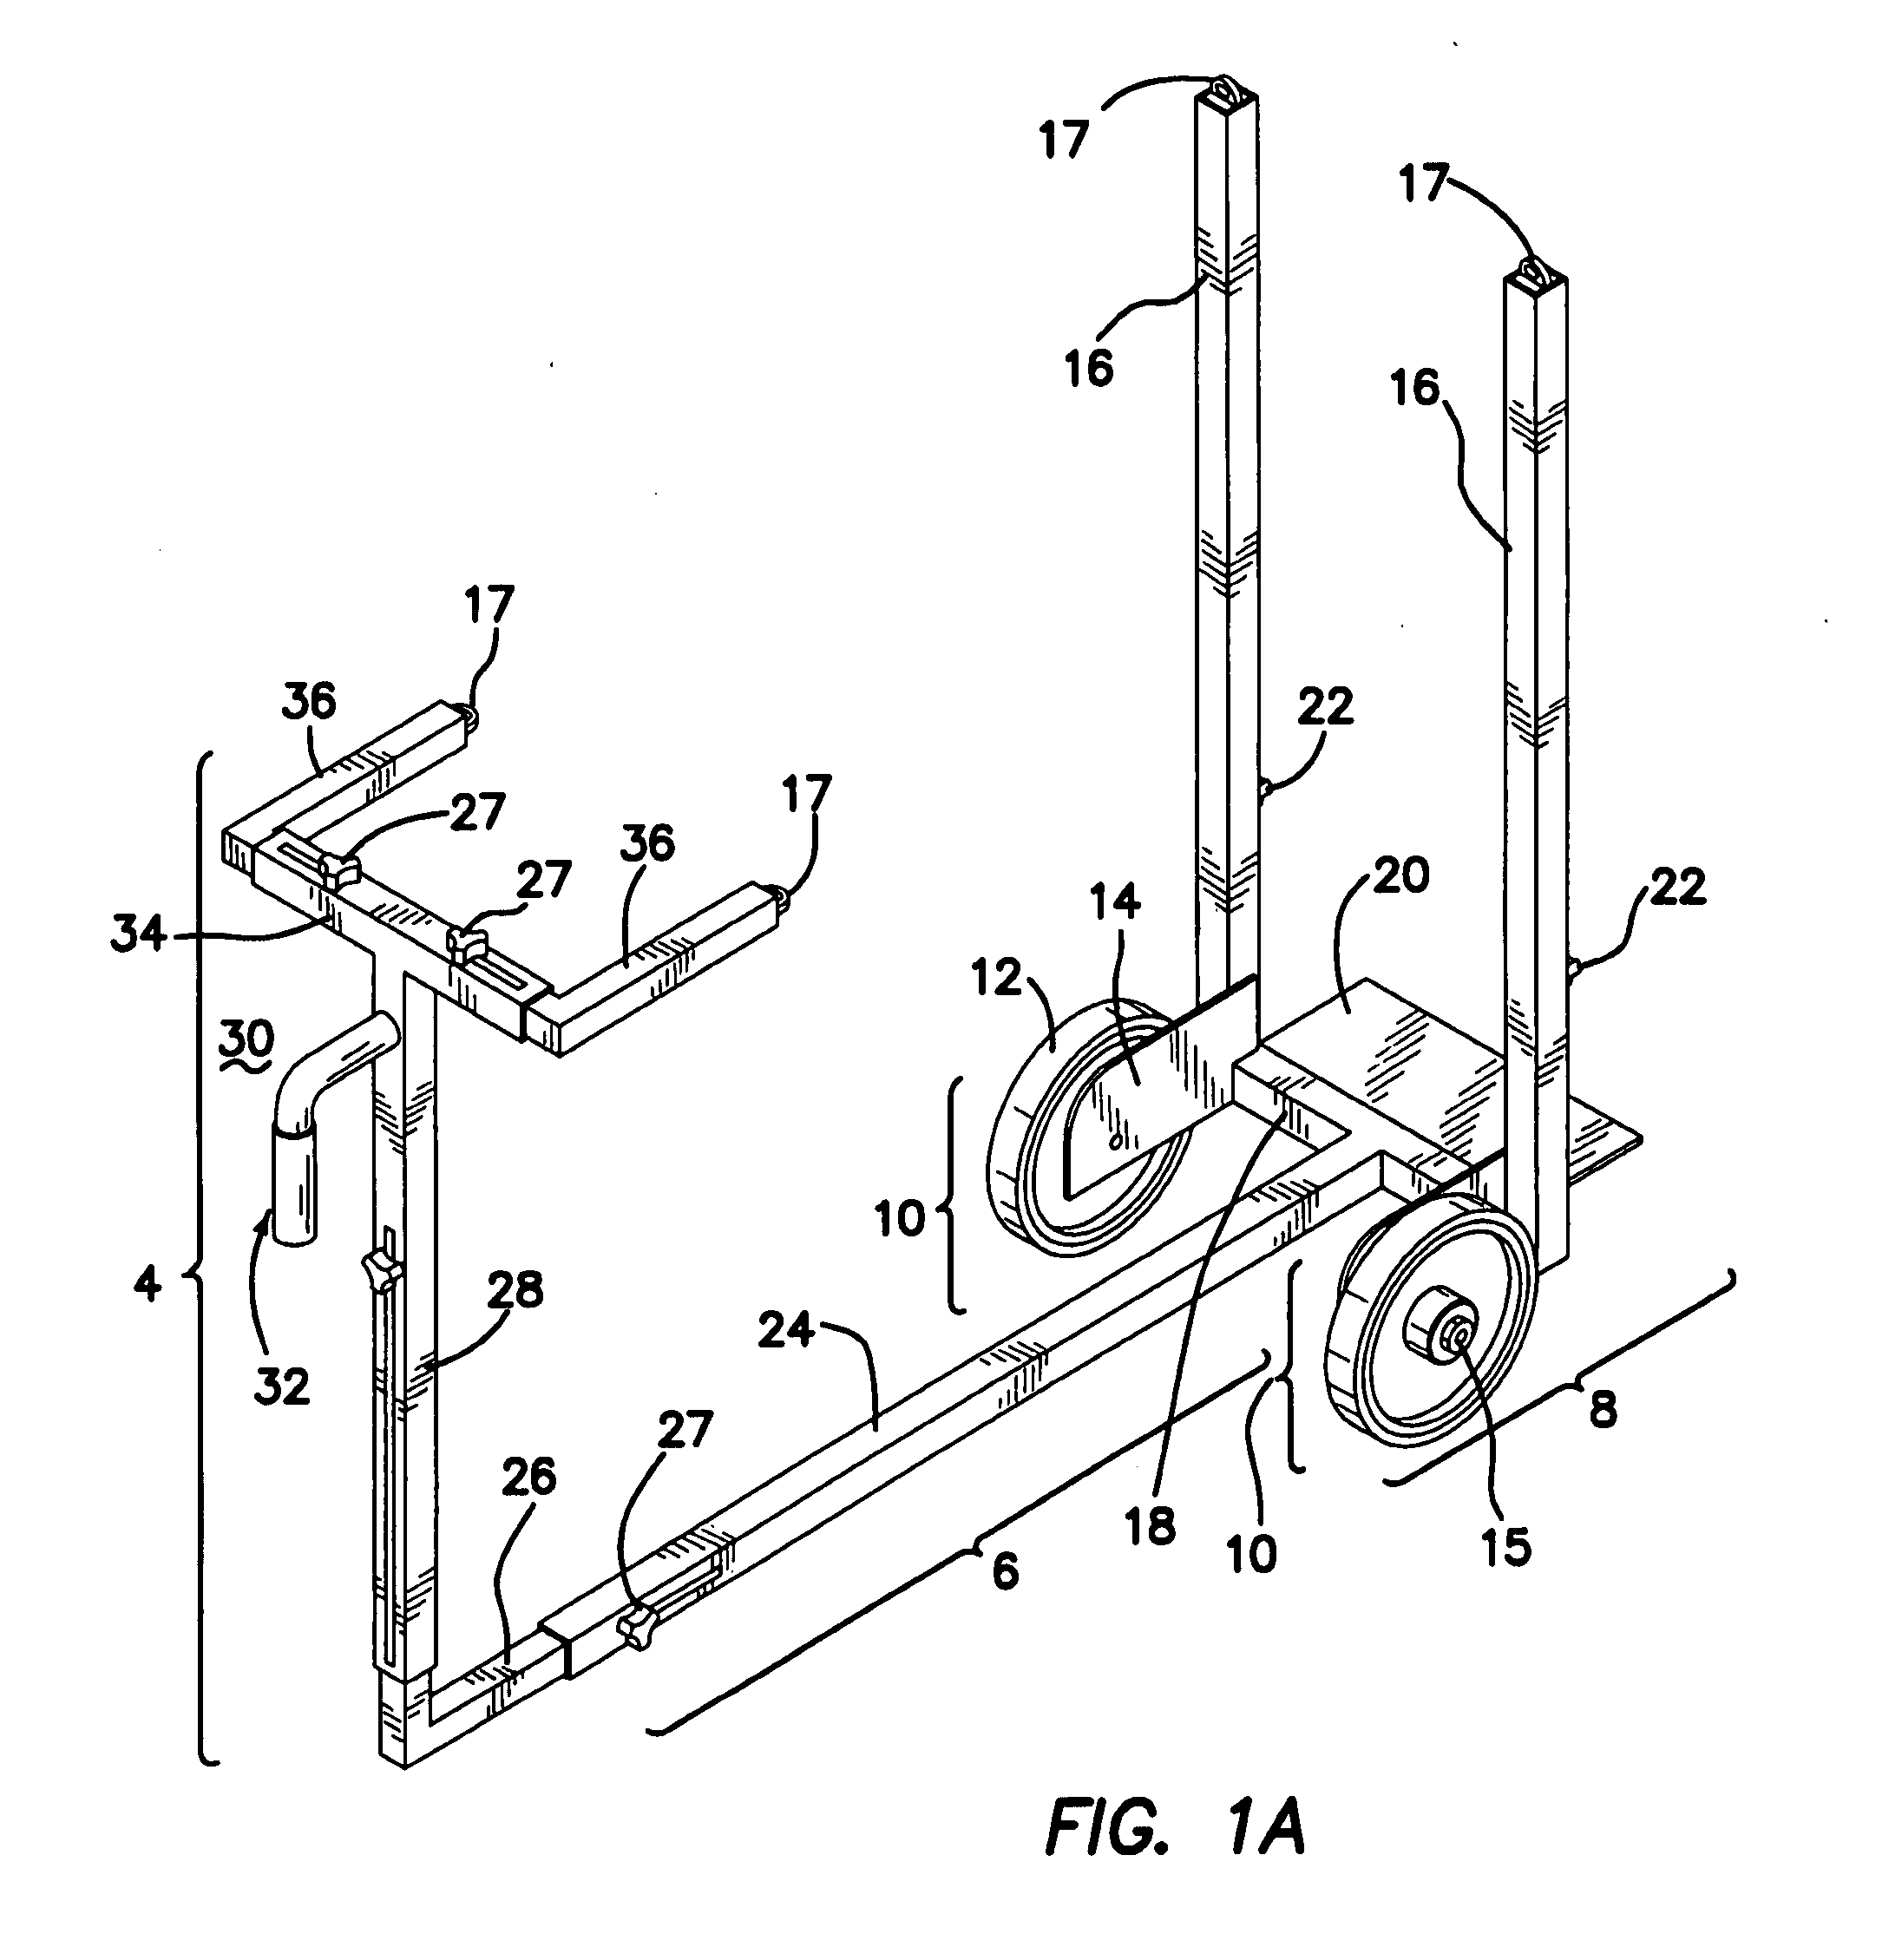 Apparatus for transport of objects